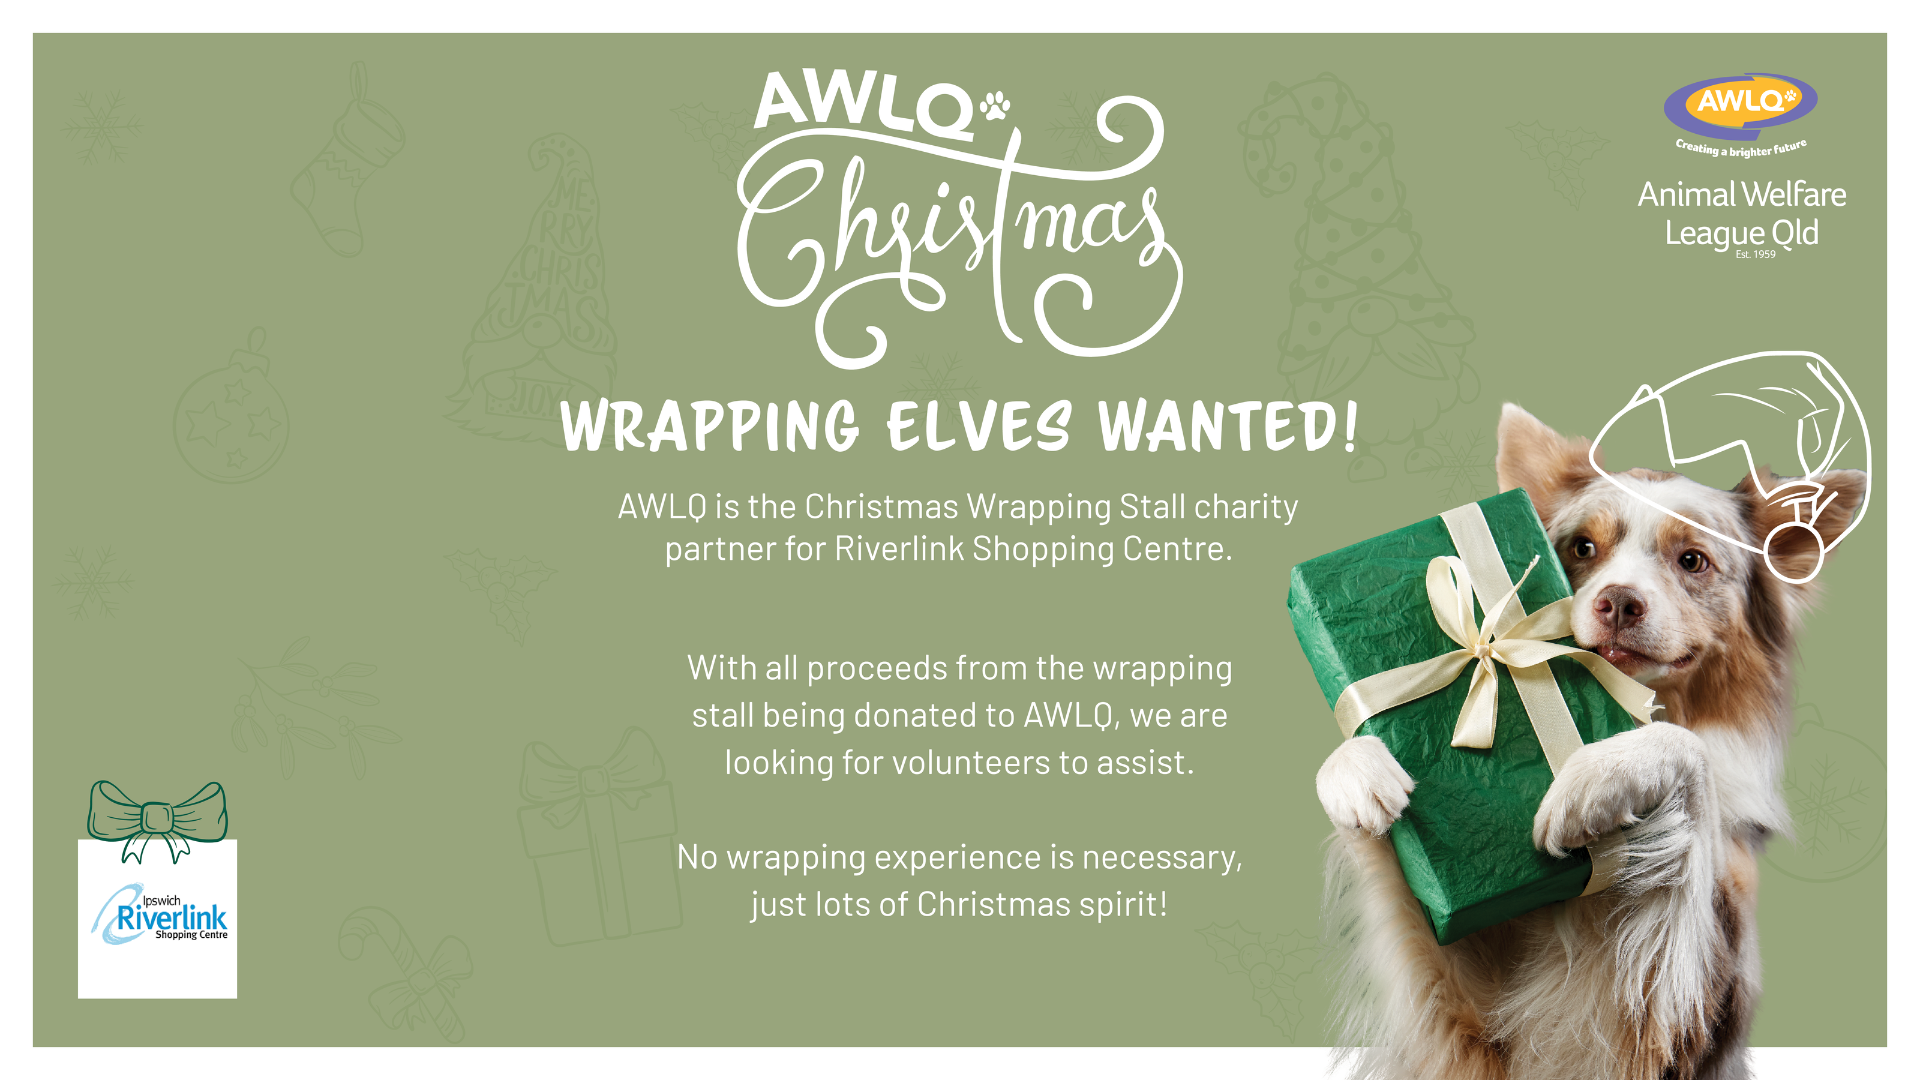 Wrapping Elves Wanted!